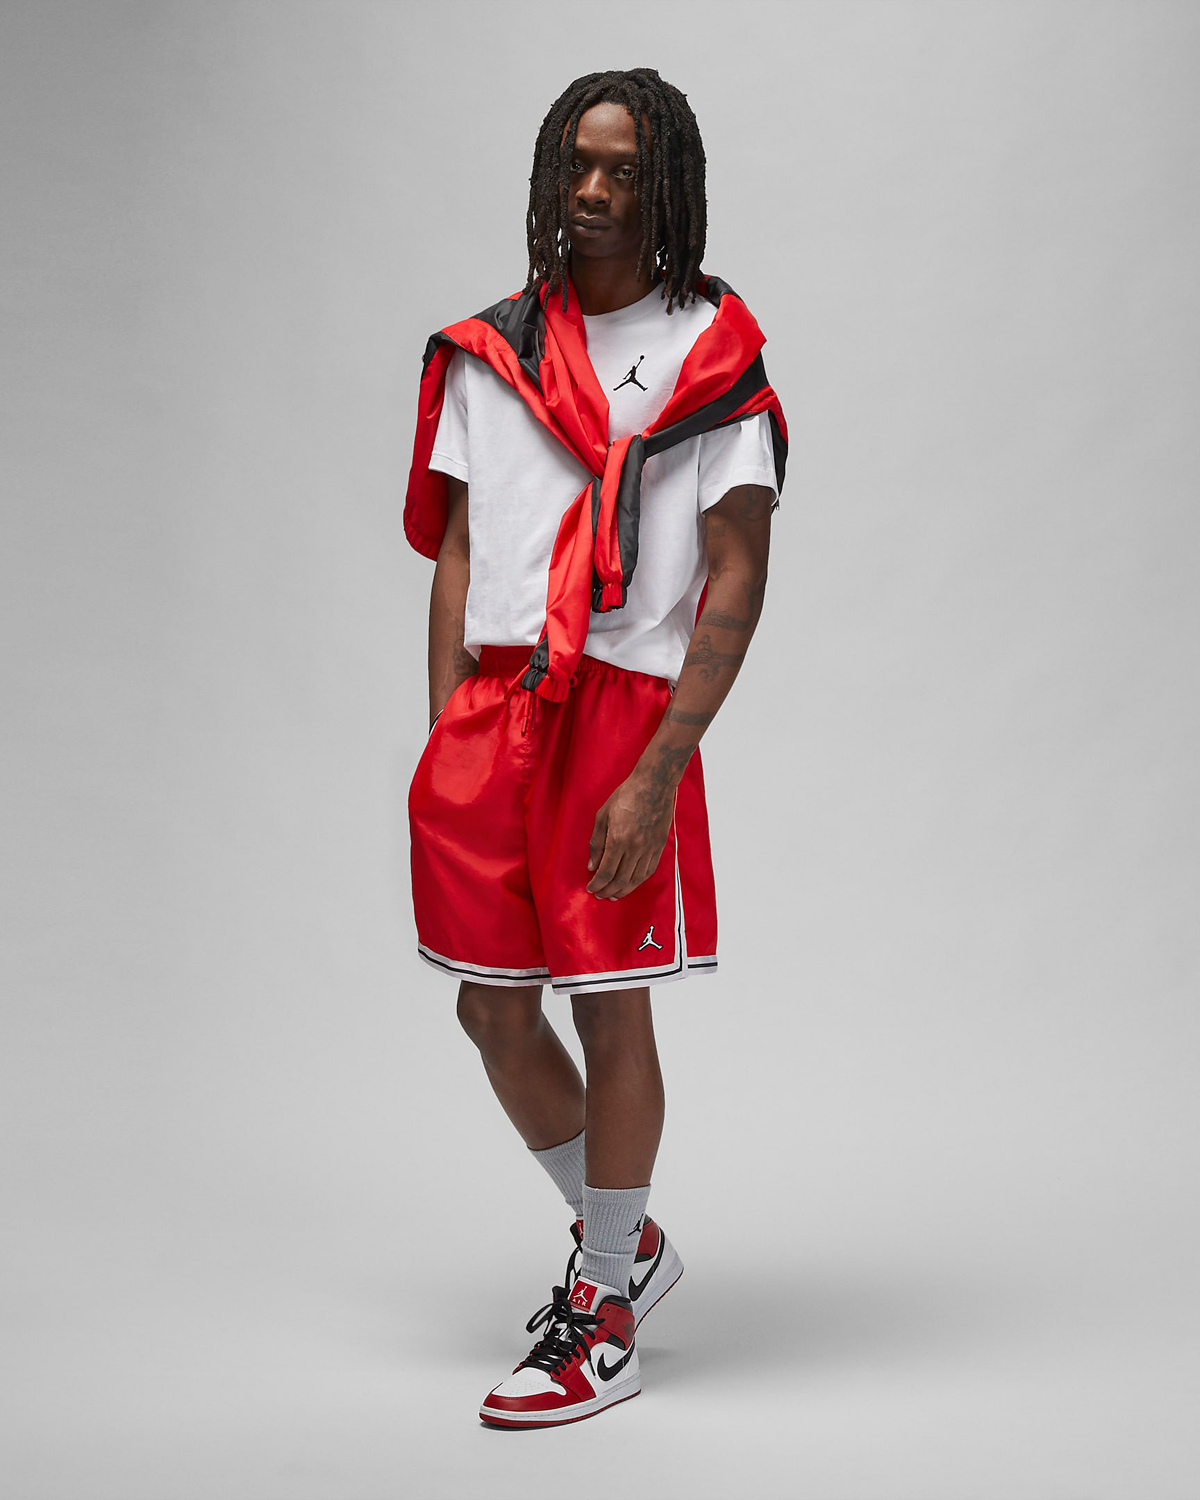 jordan-fire-red-outfit